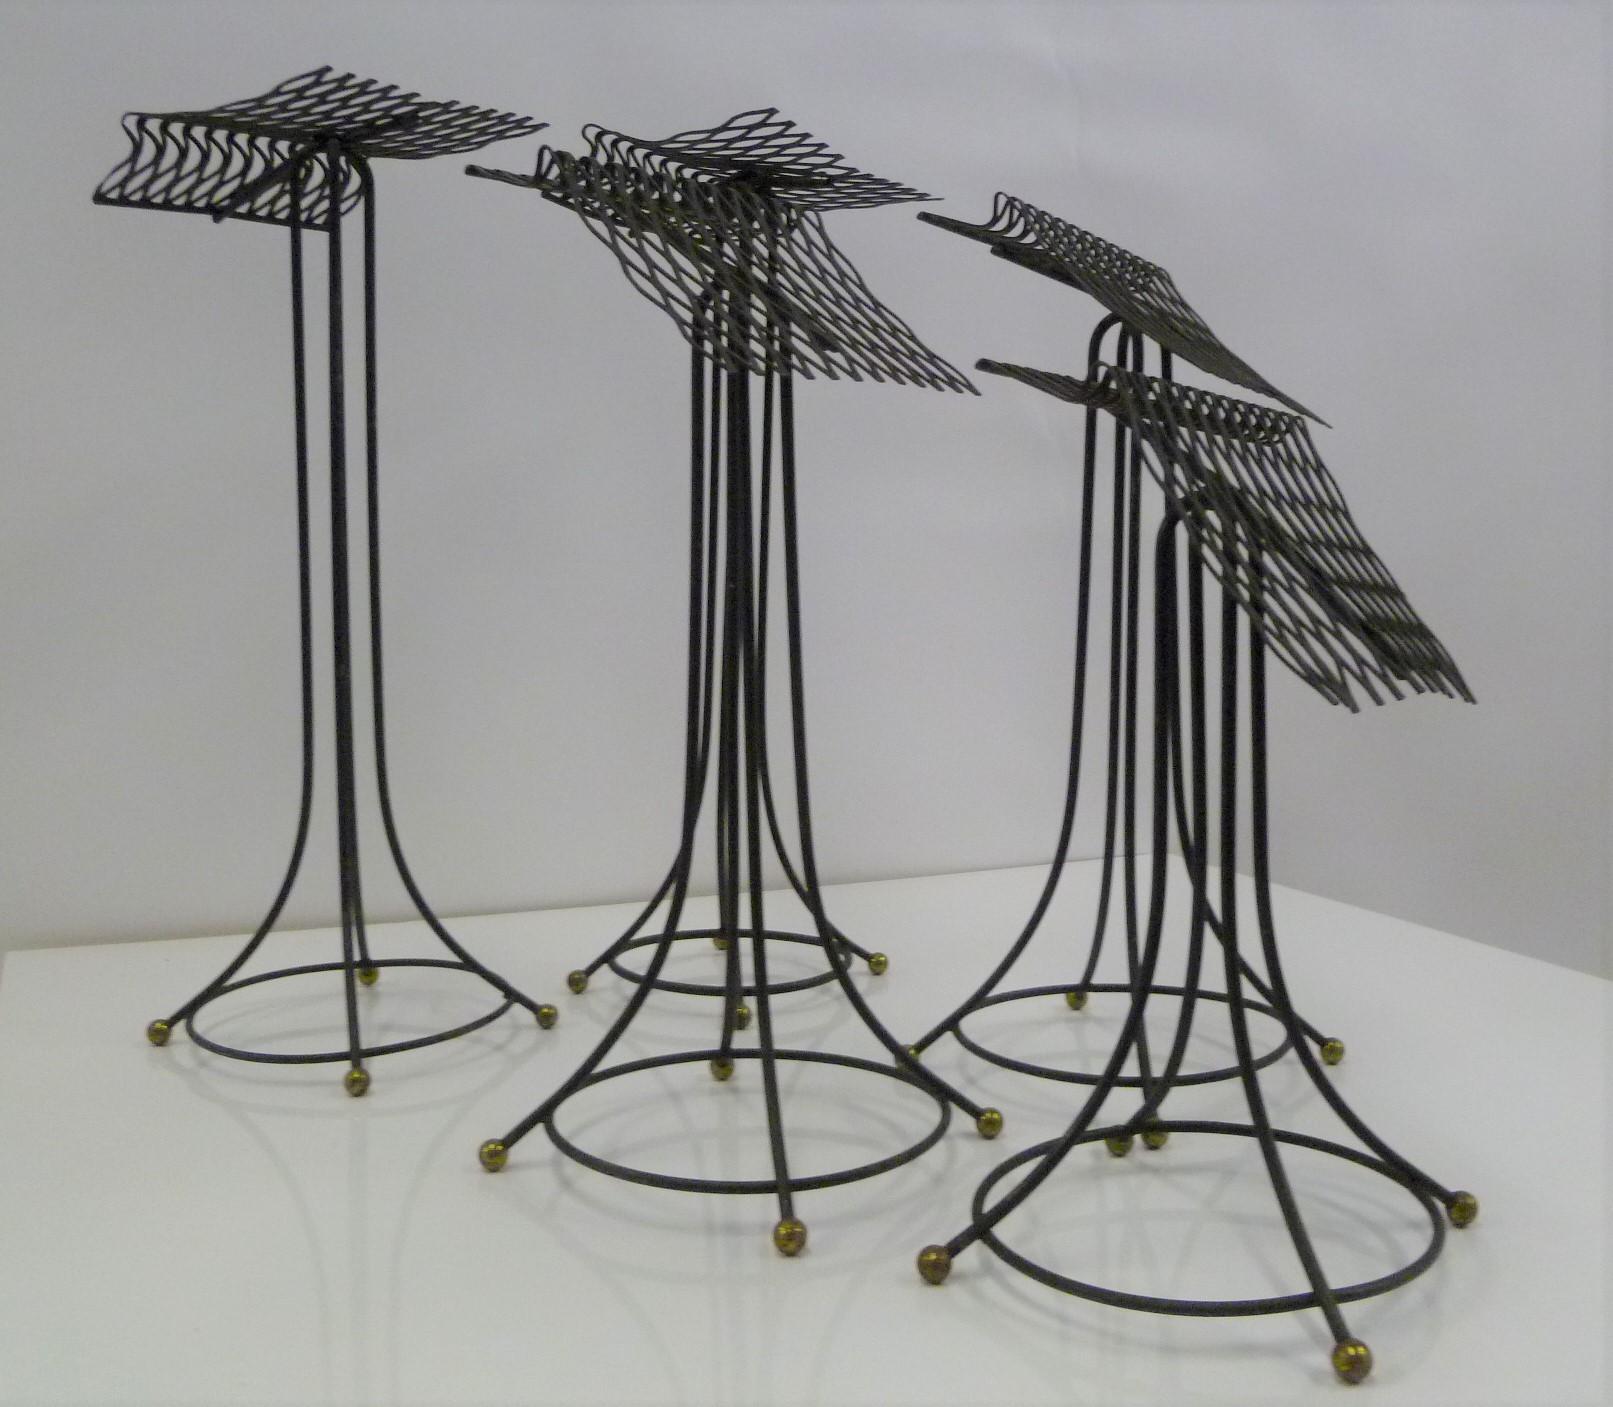 Metal Sculptural Group of 7 Modern Black Wire Store Display Stands, 1930s-1940s